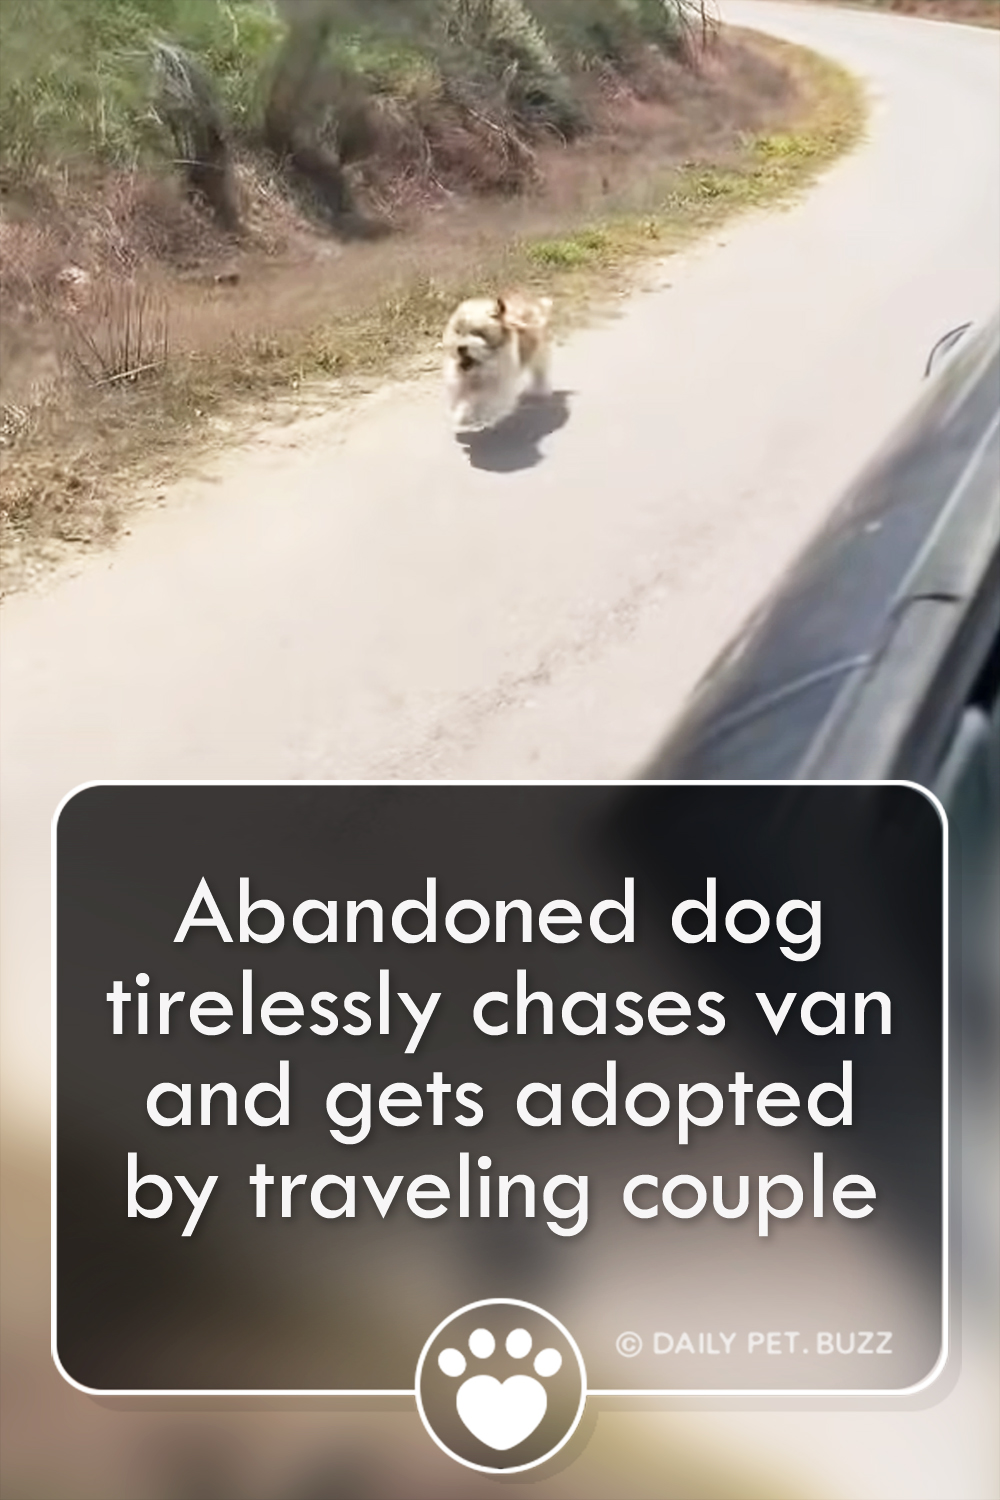 Abandoned dog tirelessly chases van and gets adopted by traveling couple